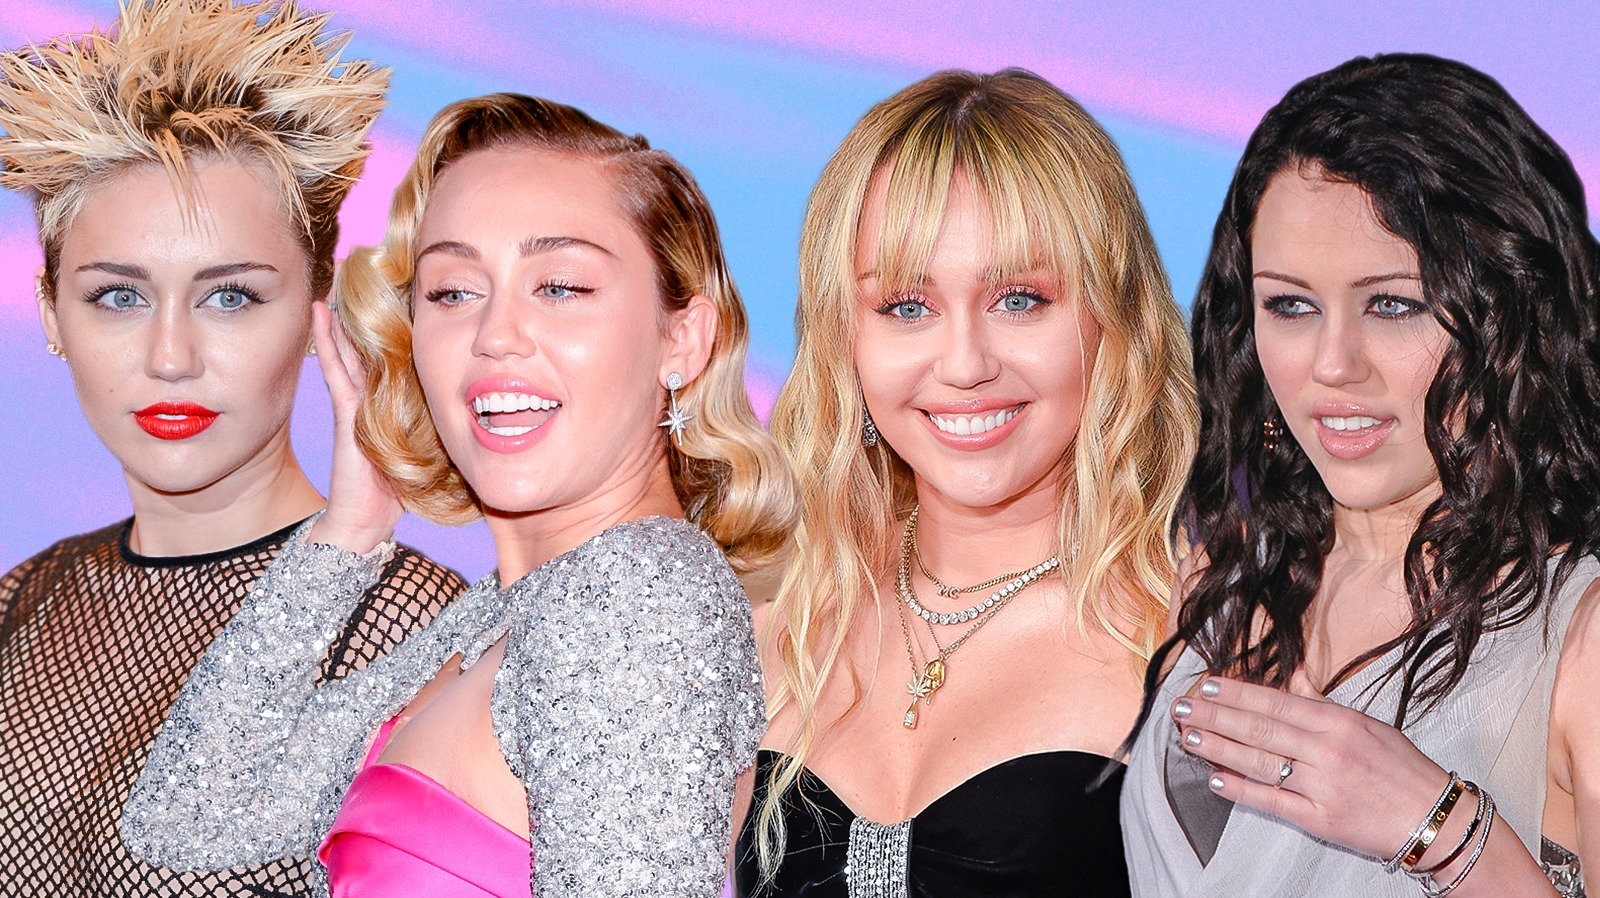 6. Miley Cyrus' Hair Transformation: From Platinum Blonde to Blue - wide 1